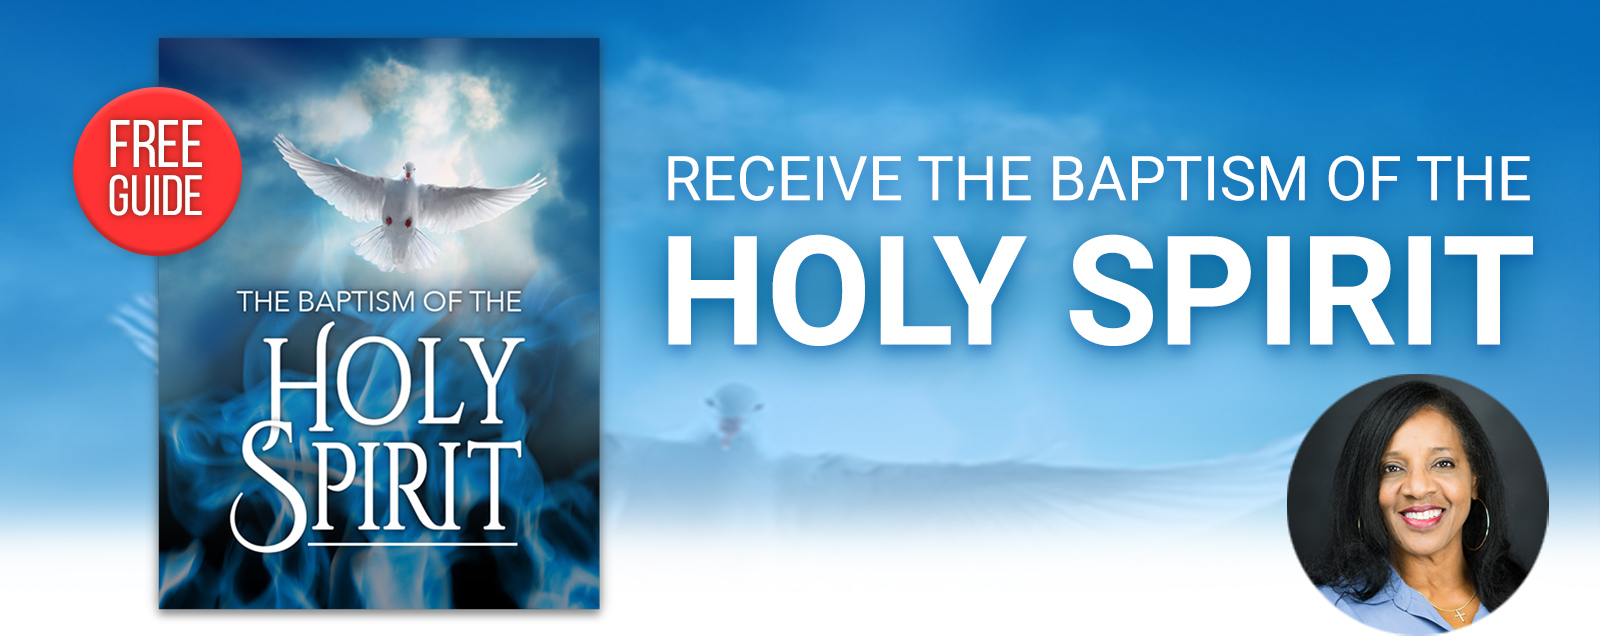 The Baptism of the Holy Spirit - Free Guide